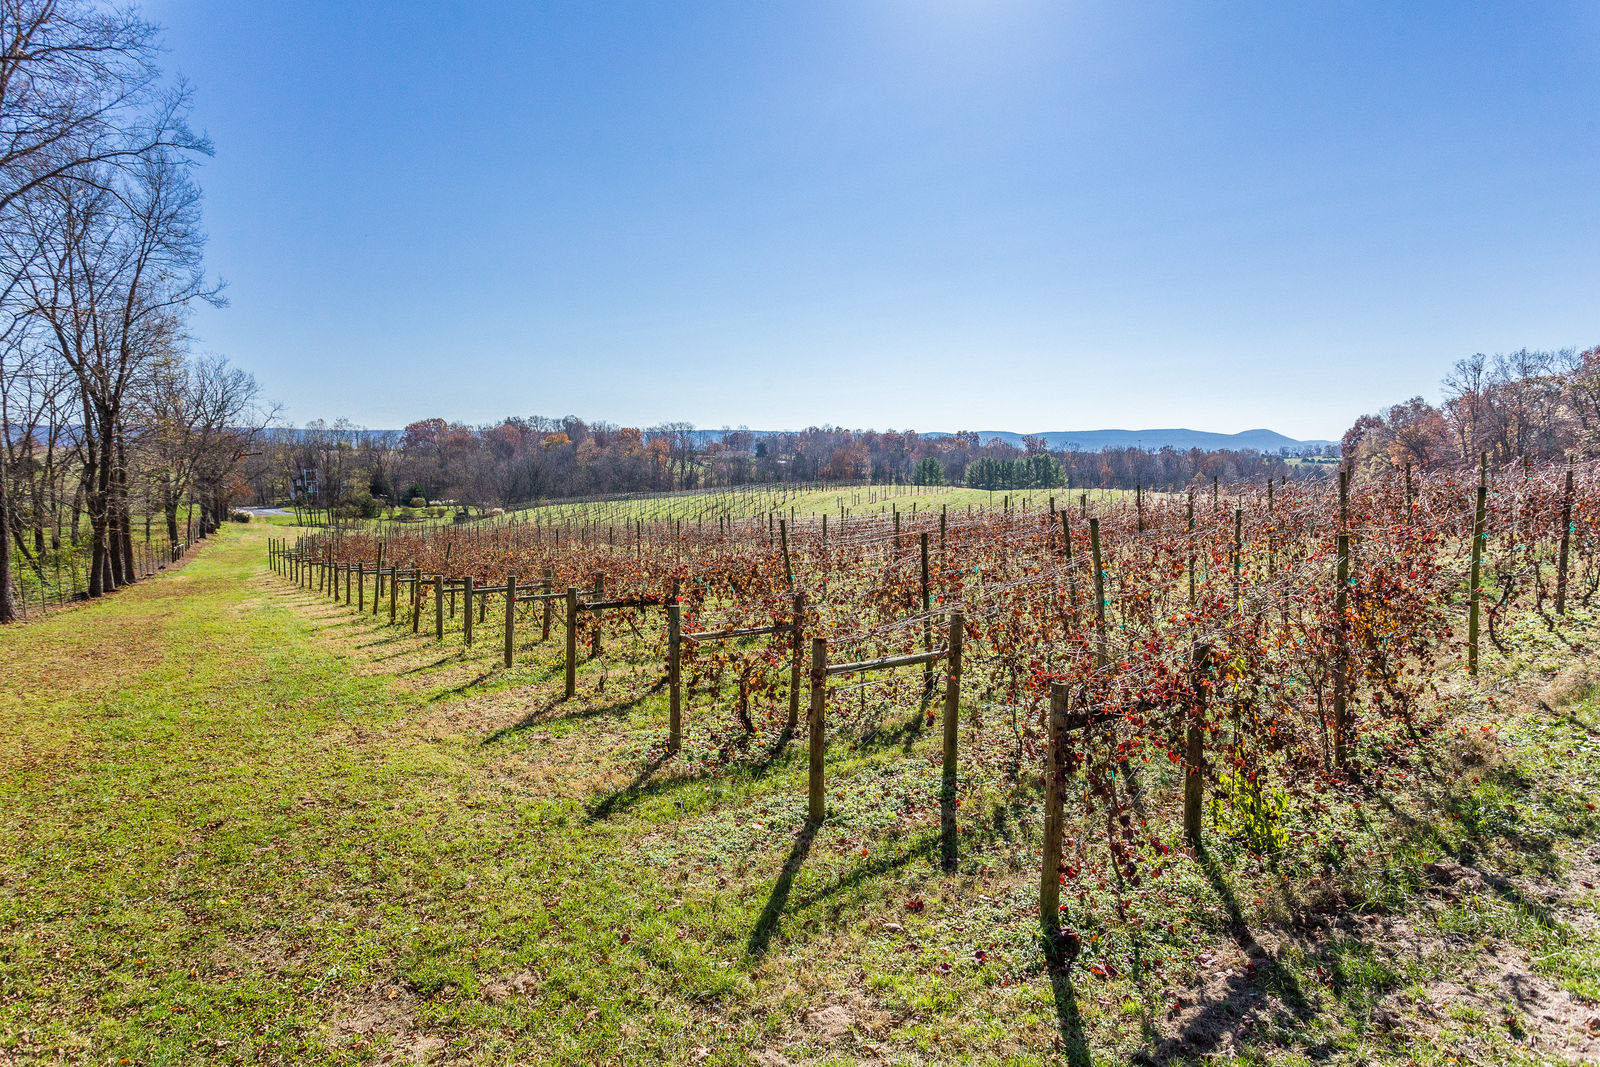 North Mountain Winery and Vineyard, a turnkey boutique vineyard and winery on 47 acres with 17 acres of producing vines and 10 varietals, is on the market for $2 million. (Courtesy Will Hinostroza, BTW Images/Keller Williams)